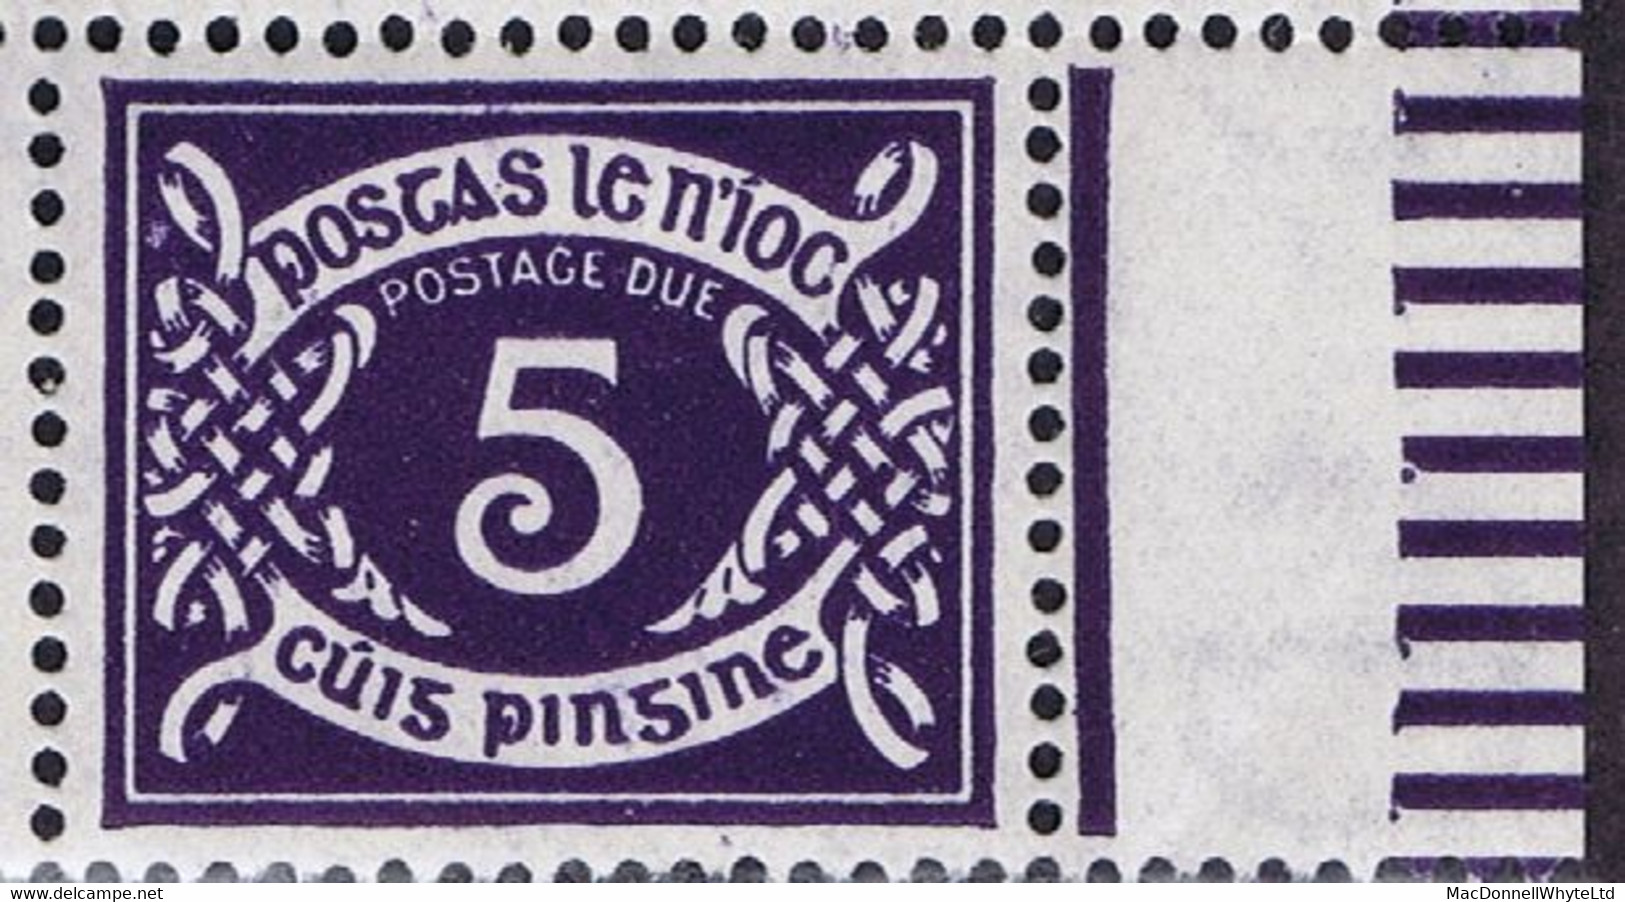 Ireland Postage Dues Varieties Inc 1940-69 E 1d Inverted Q, 2d Aspirate Missing, 5d+8d Watermark Inverted - Postage Due